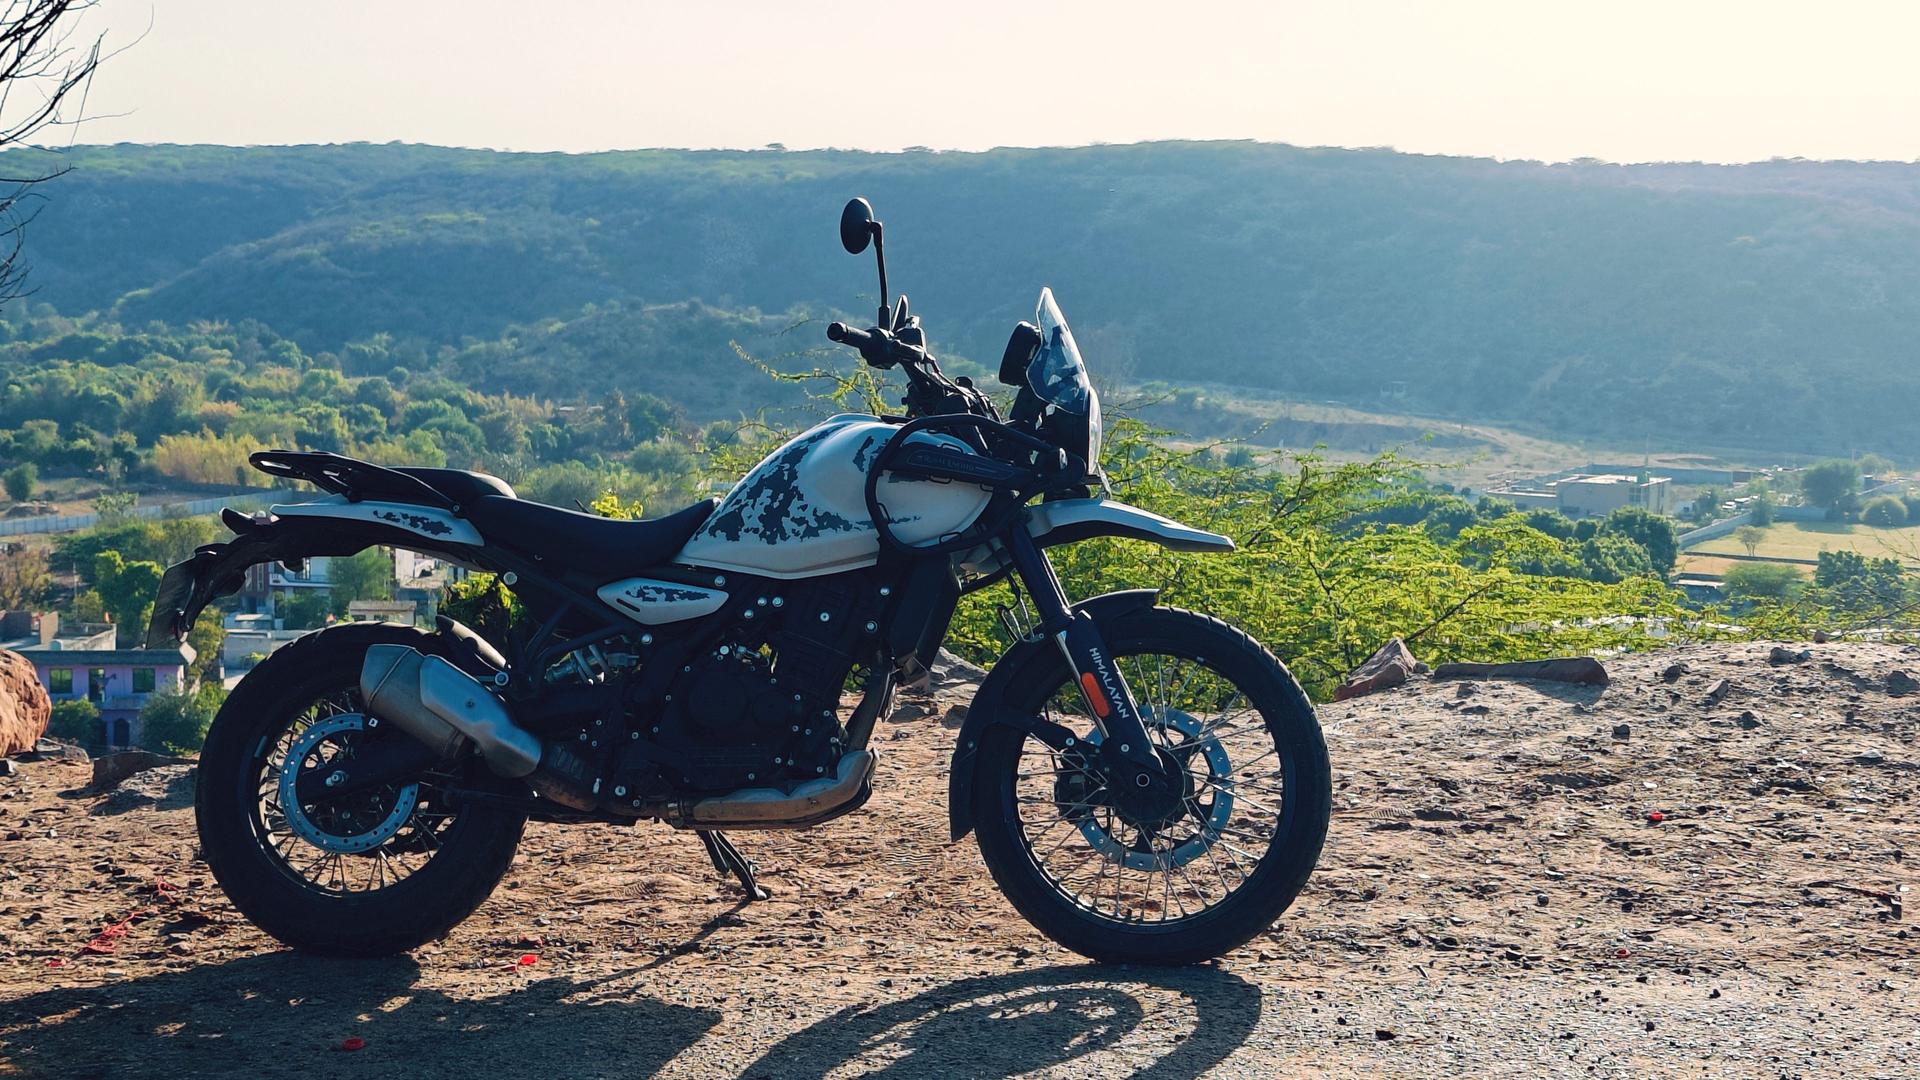 The new Royal Enfield Himalayan now joins car&bike’s long term fleet. Over the next few months, we will tell you how the motorcycle holds up to the rigours of daily riding, highway jaunts, off-road riding and much more. 